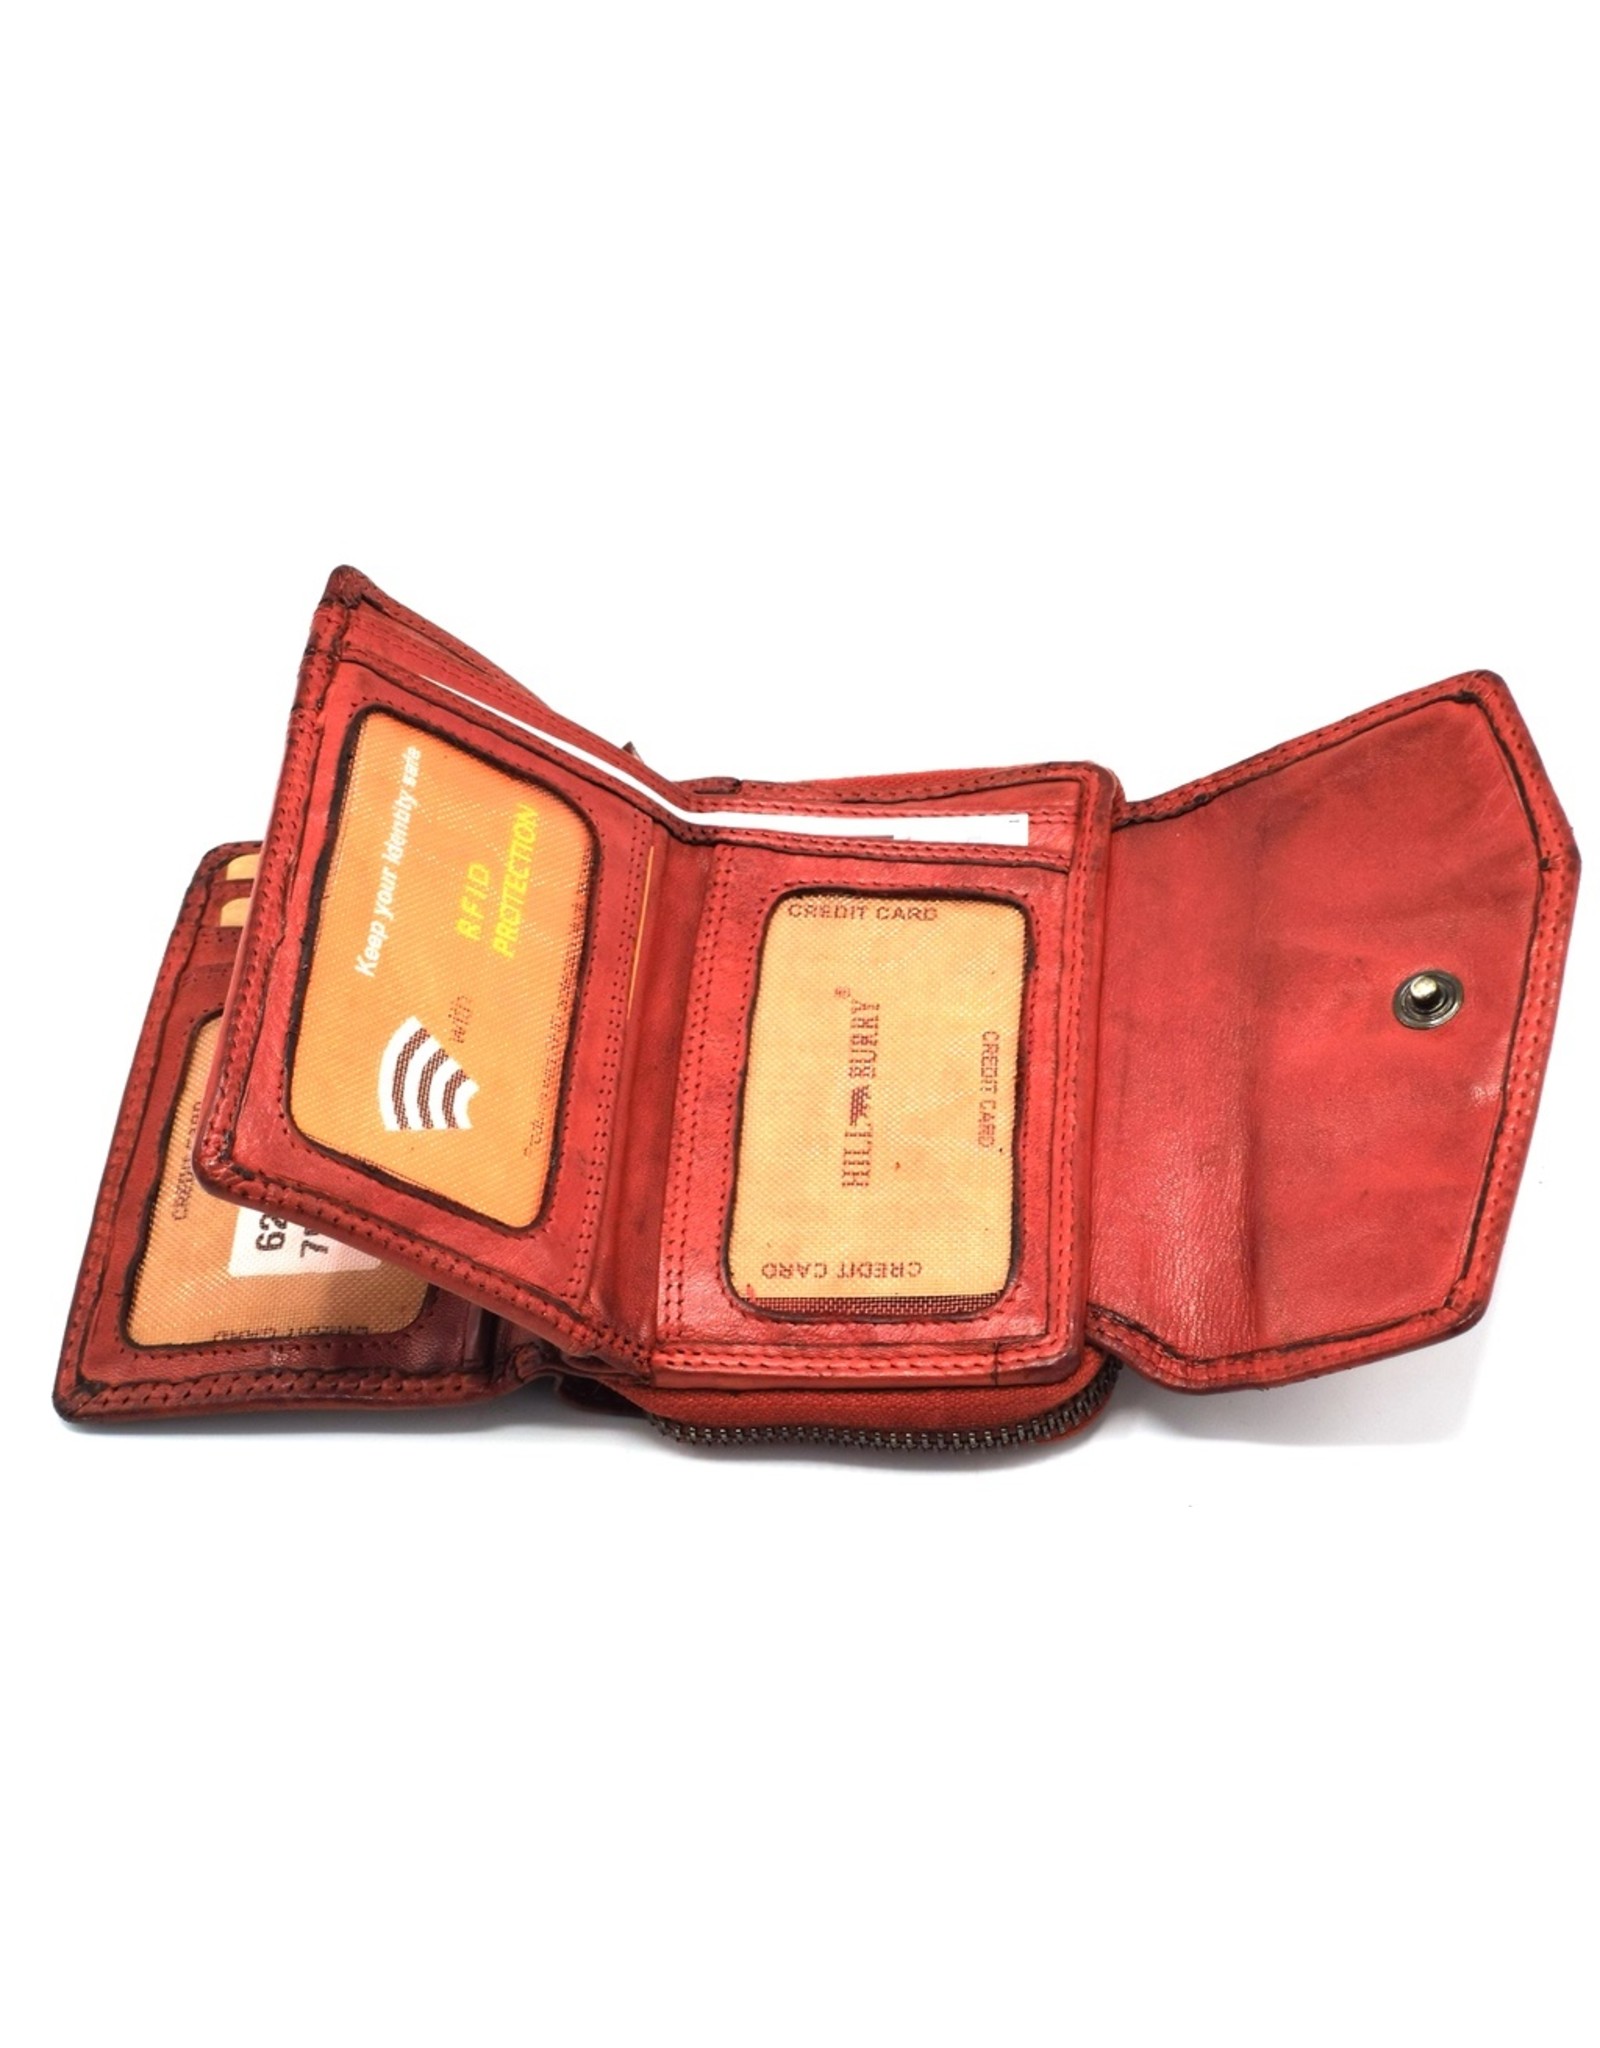 HillBurry Leather Wallets - Hillburry Wallet with Cover Washed Leather Red